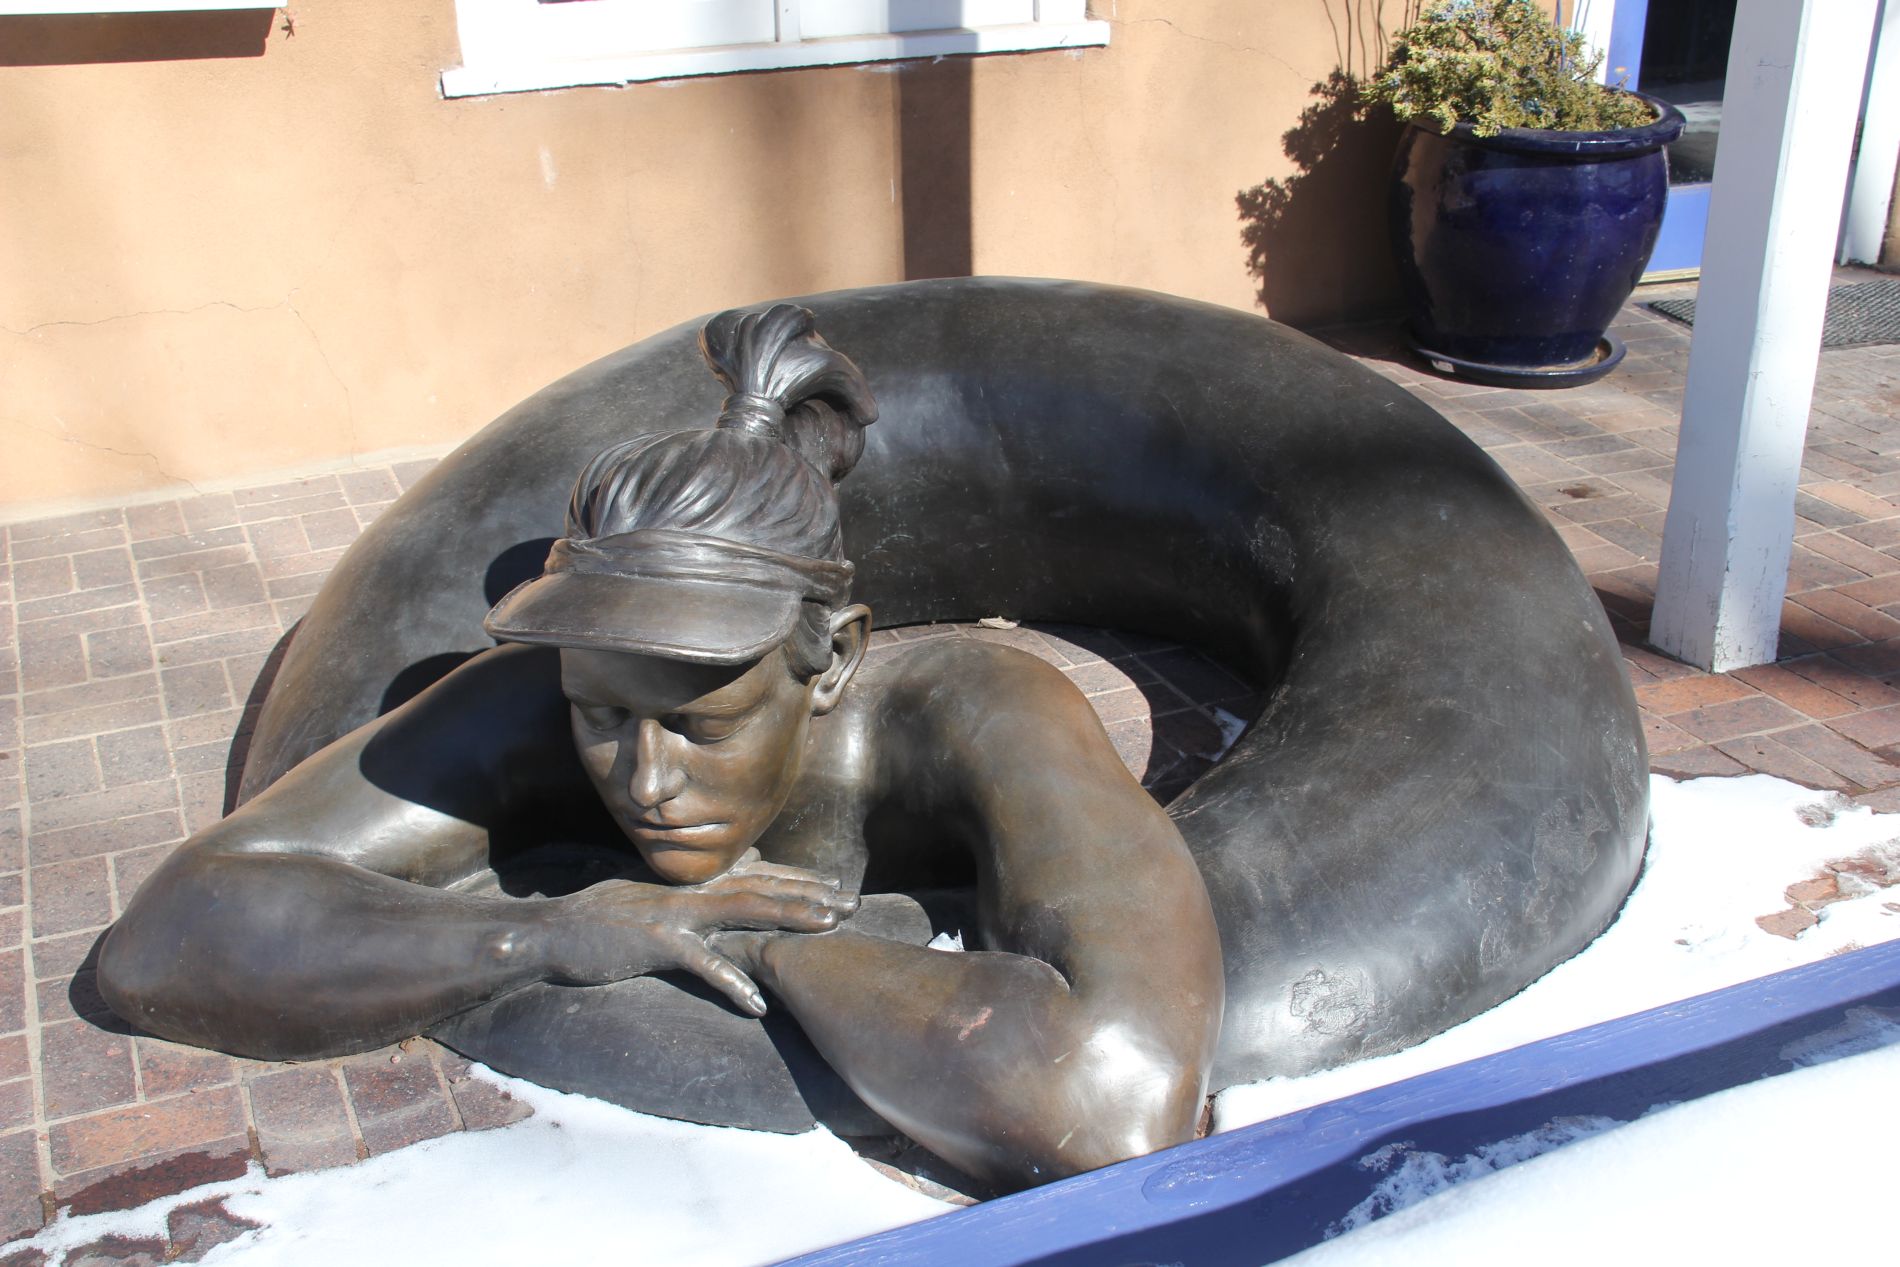 Woman on inner tube statue on Canyon Road in Santa Fe, New Mexico